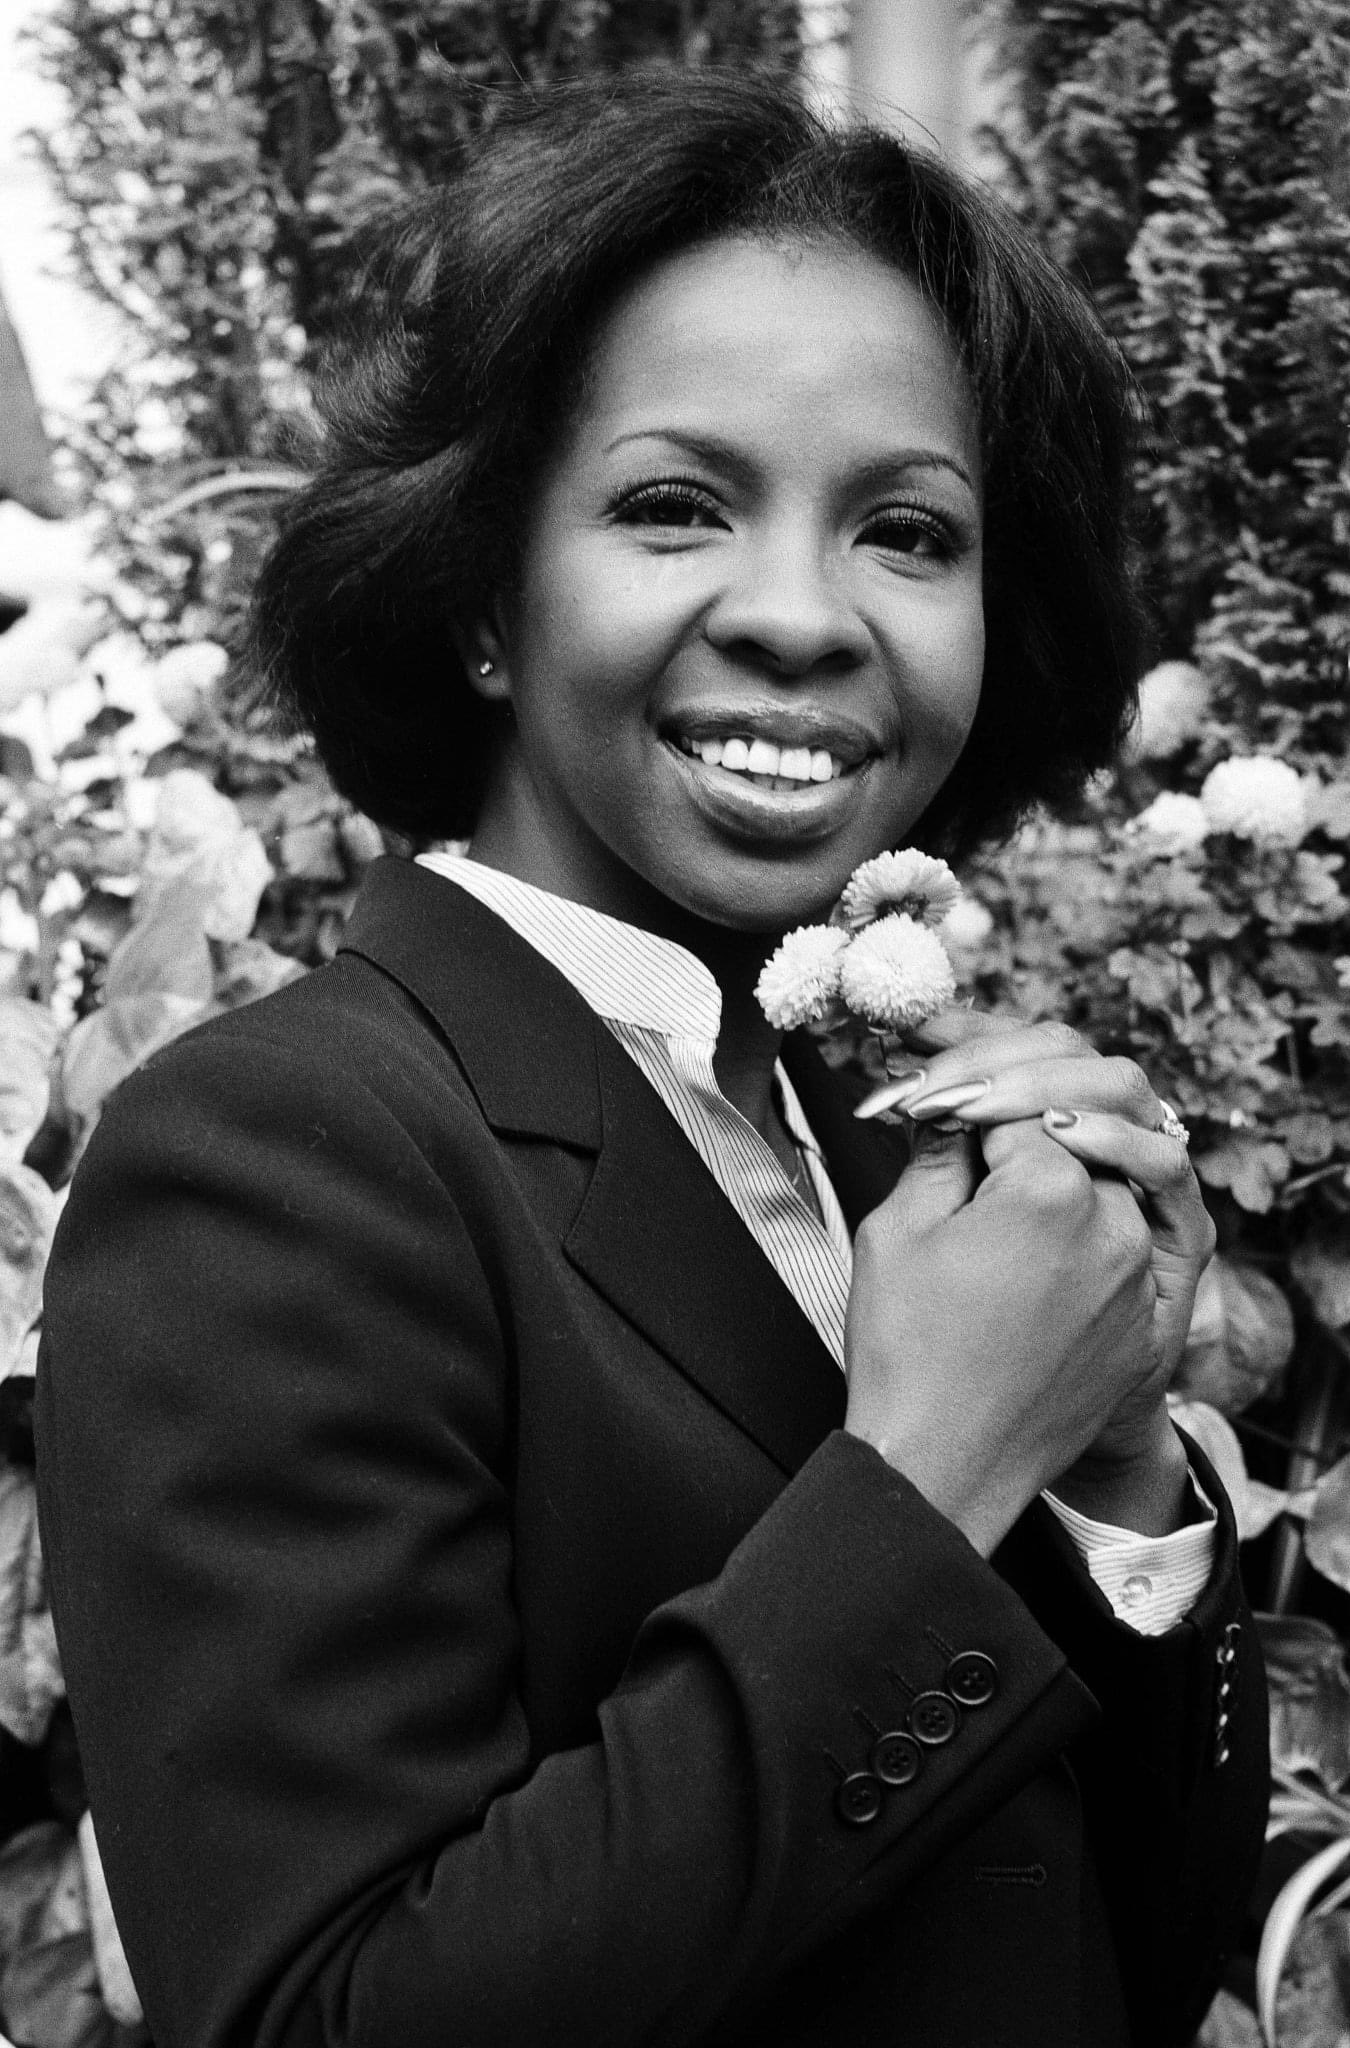 Happy birthday to the Empress of Soul, Gladys Knight - 78 today. 